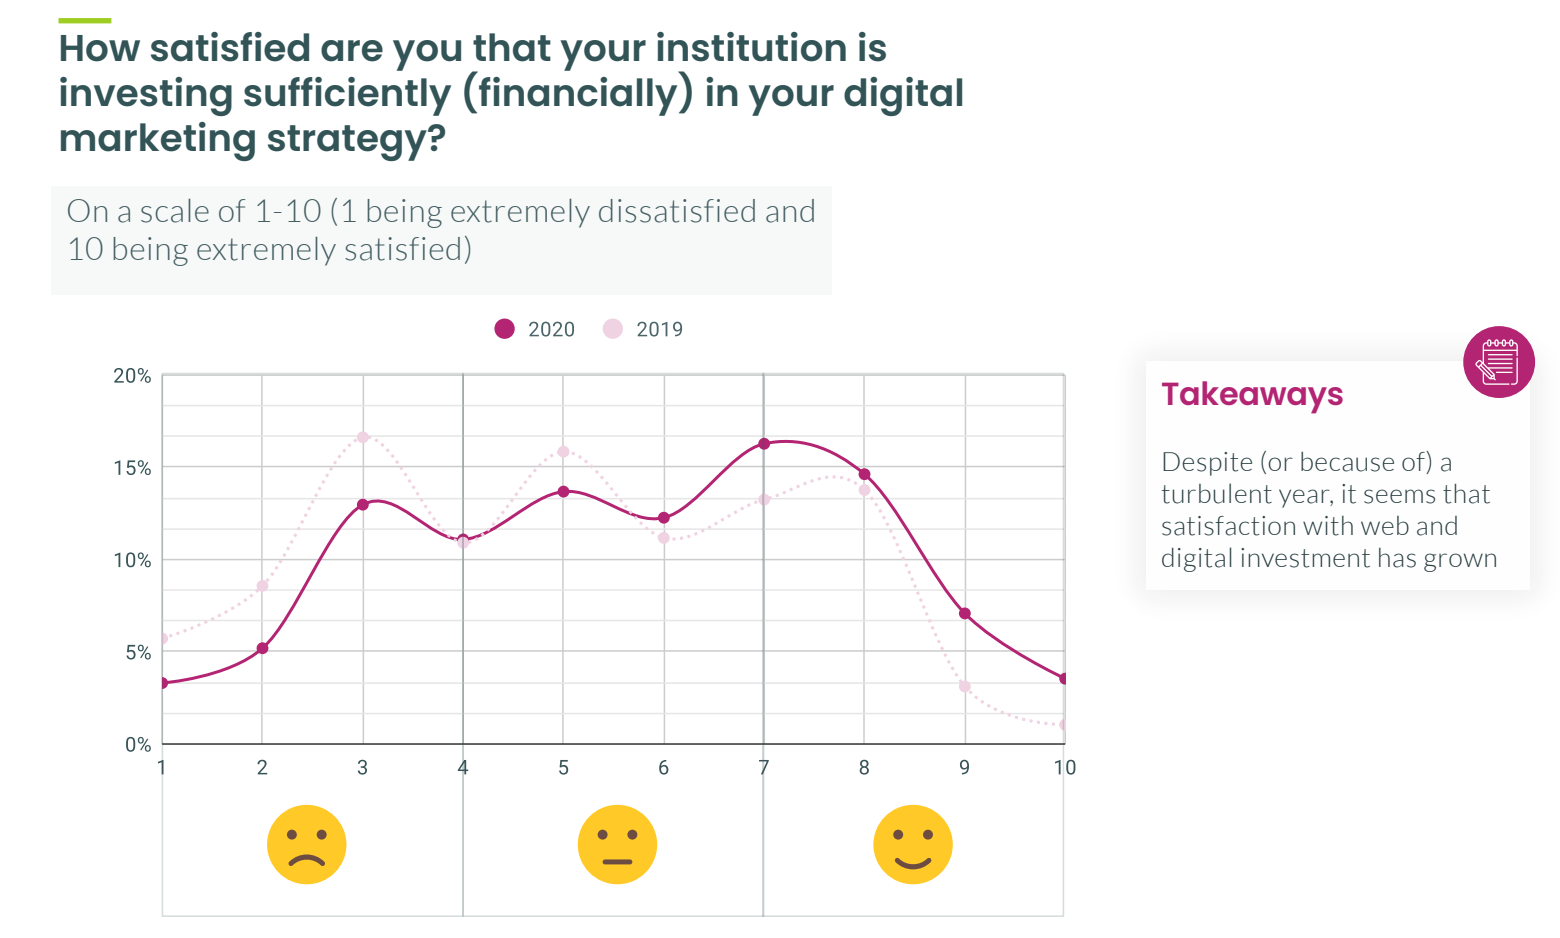 Despite (or because of) a turbulent year, it seems that satisfaction with web and digital investment has grown